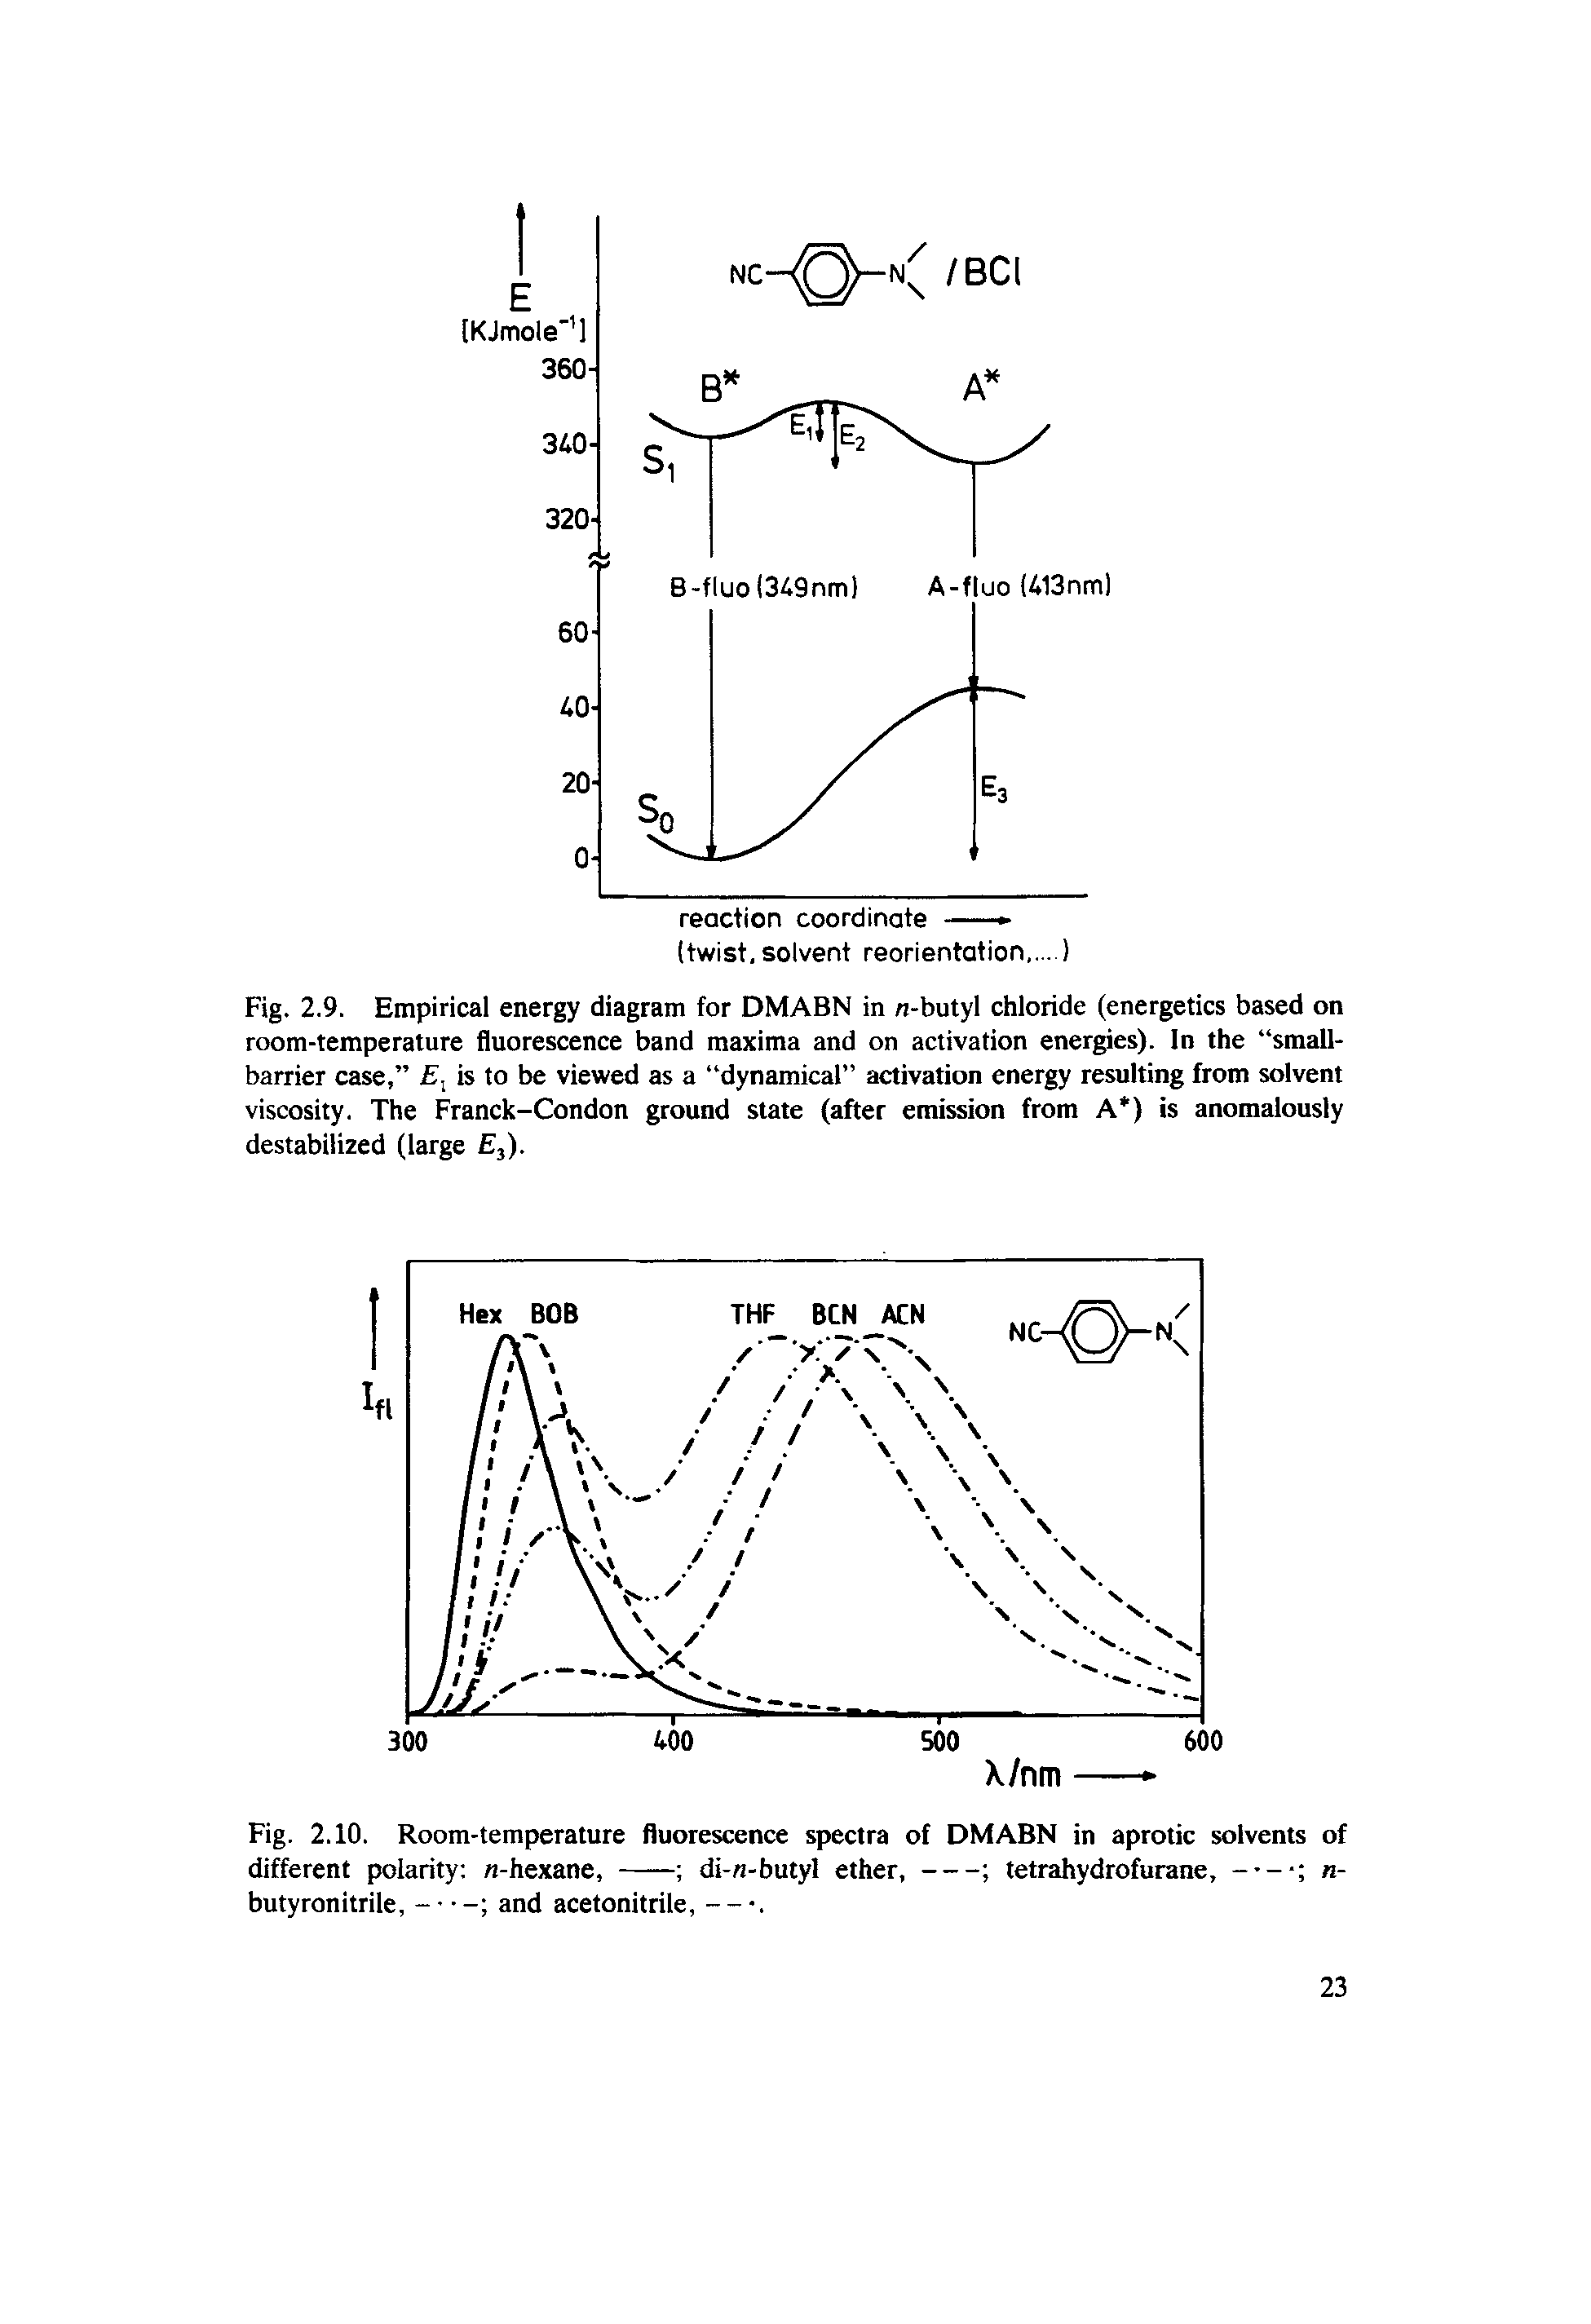 Fig. 2.9. Empirical energy diagram for DMABN in n-butyl chloride (energetics based on room-temperature fluorescence band maxima and on activation energies). In the small-barrier case, E. is to be viewed as a dynamical activation energy resulting from solvent viscosity. The Franck-Condon ground state (after emission from A ) is anomalously destabilized (large E3).